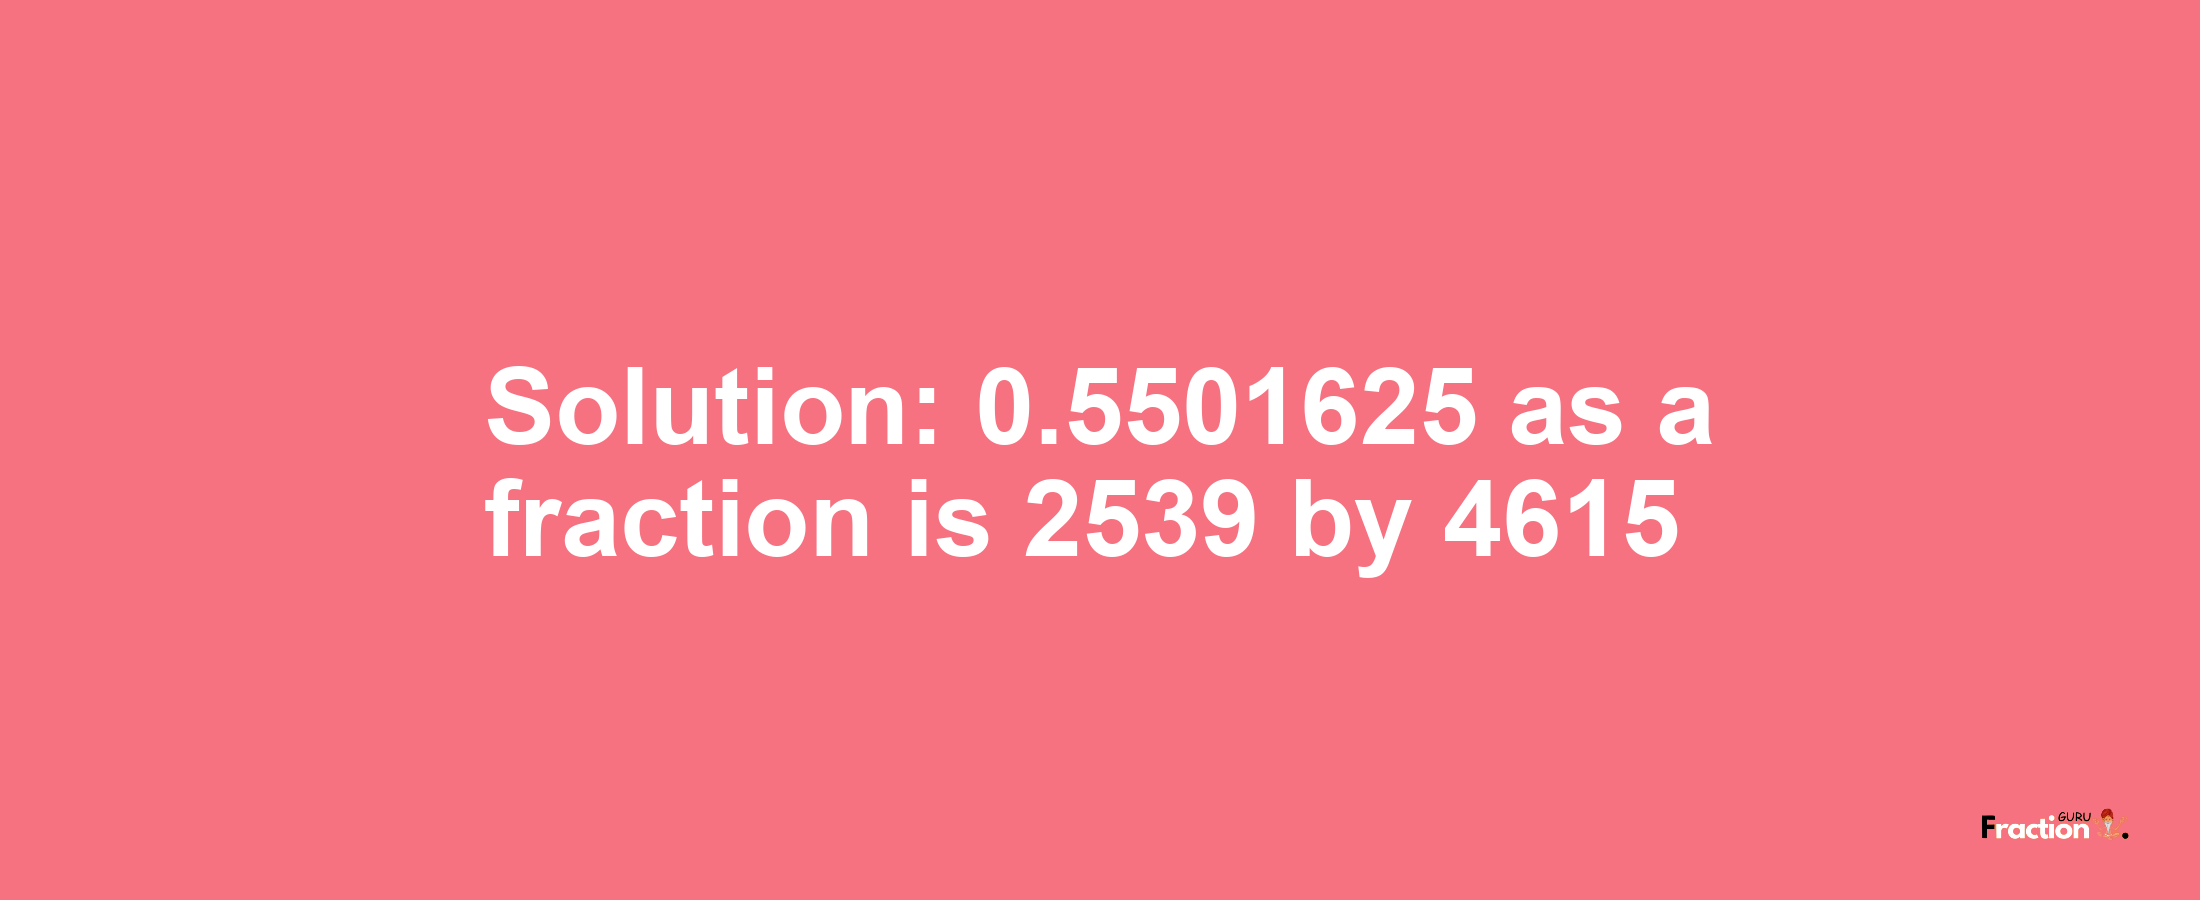 Solution:0.5501625 as a fraction is 2539/4615